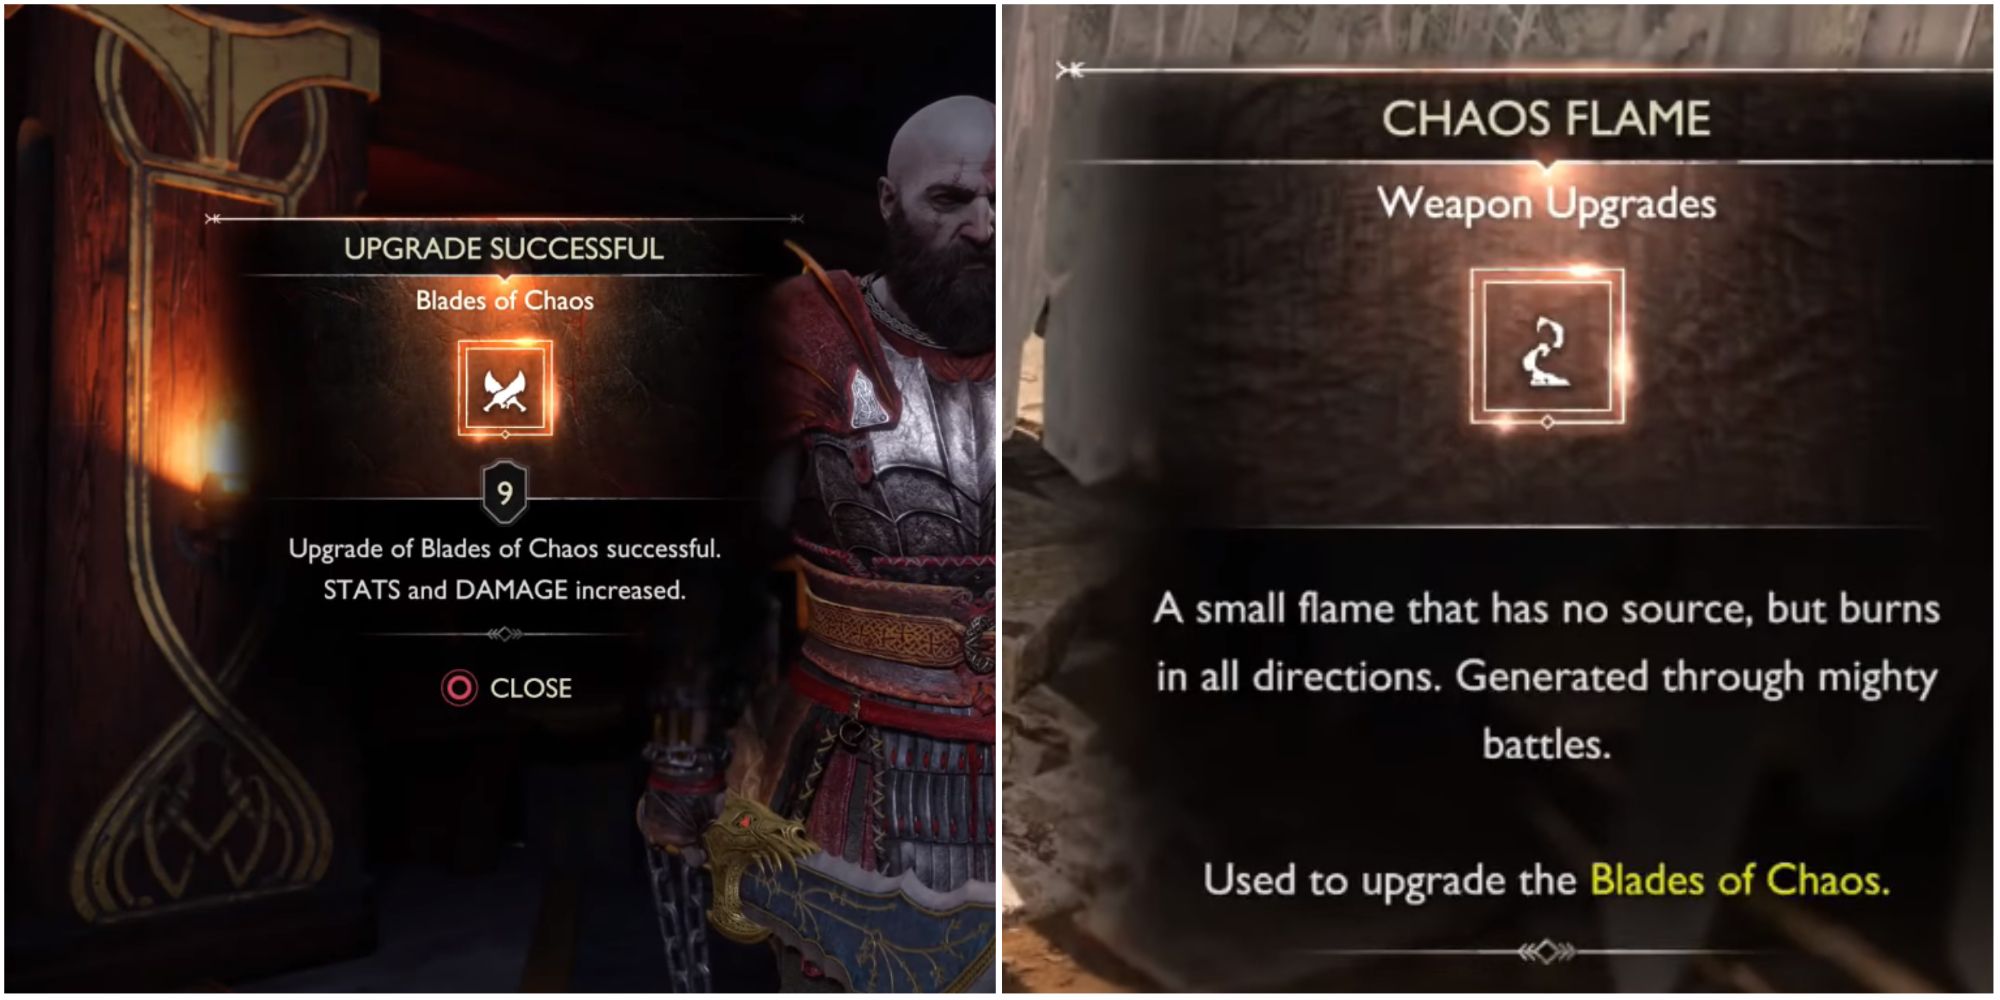 Split image showing Kratos upgrading the Blades of Chaos.